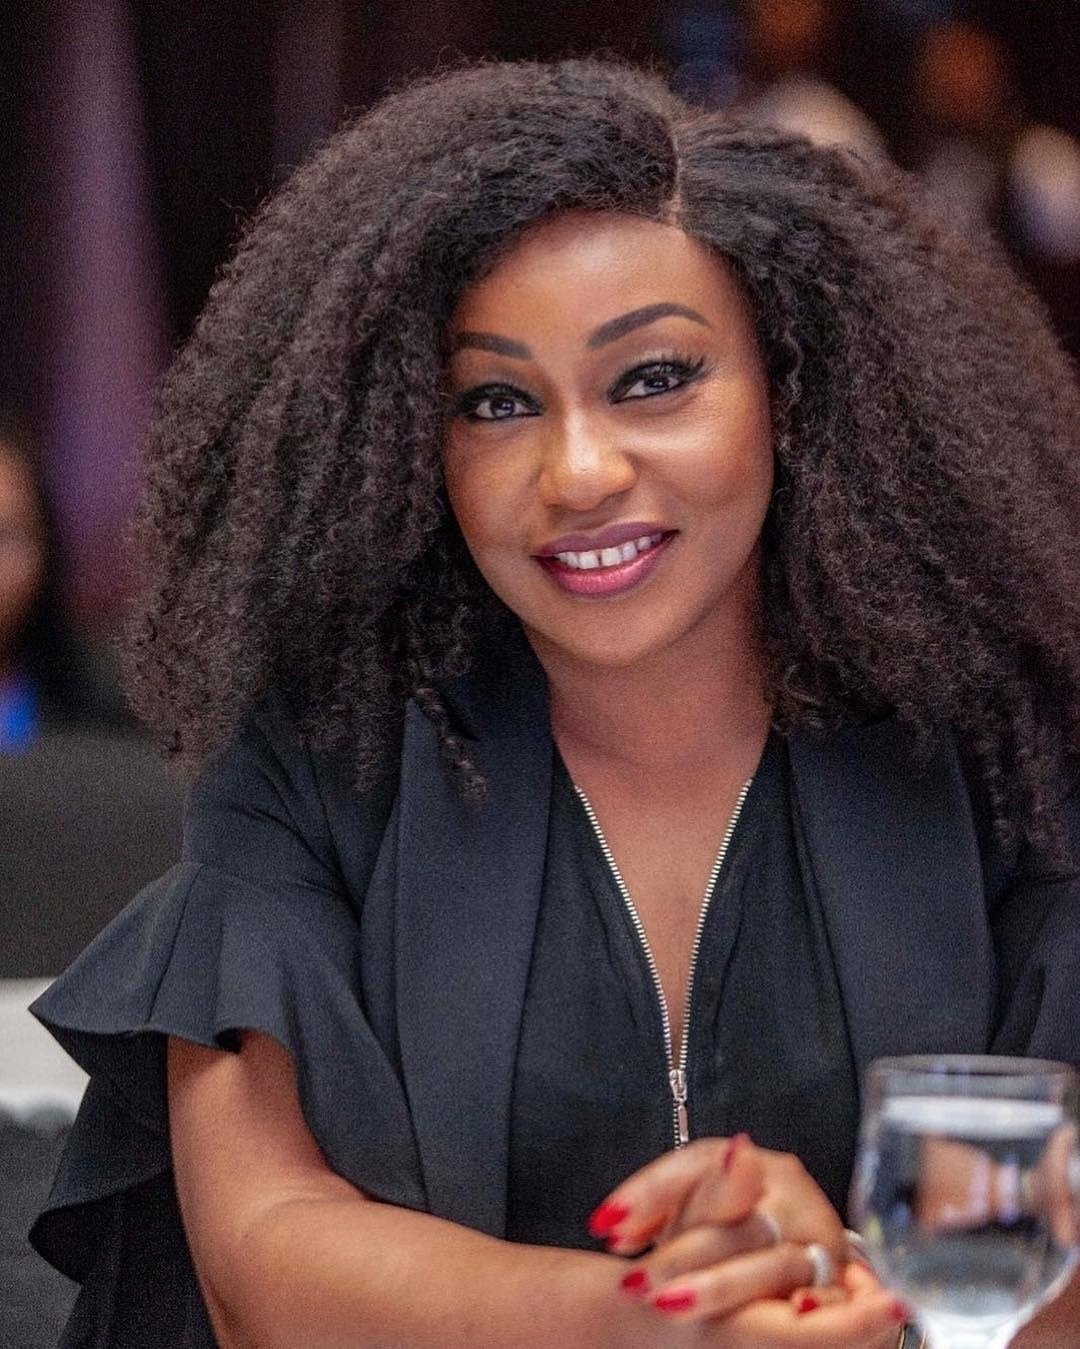 Wealth, fame and more reasons Genevieve Nnaji and Rita Dominic may never get married (Photos)